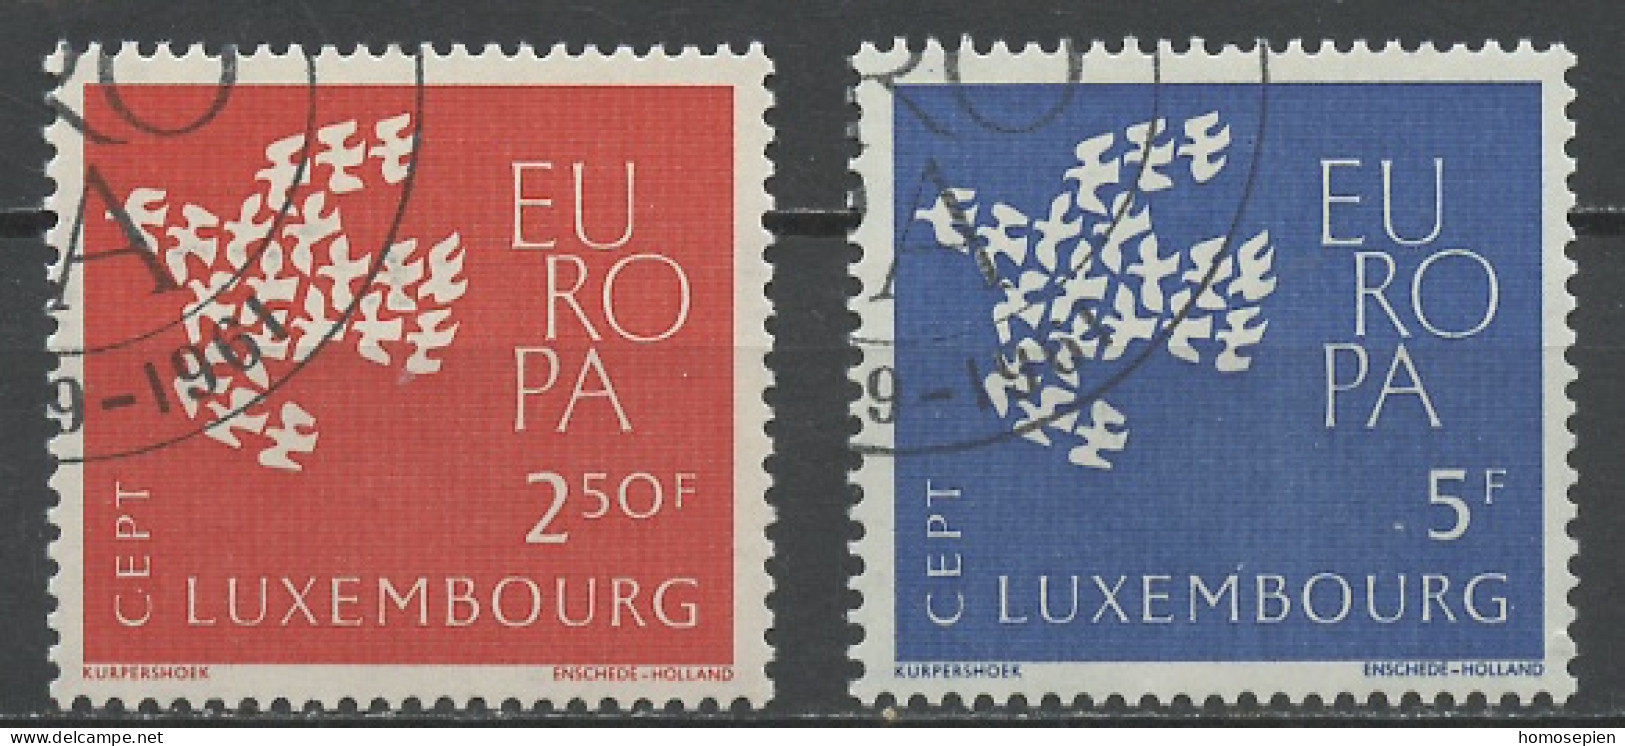 Luxembourg - Luxemburg 1961 Y&T N°601 à 602 - Michel N°647 à 648 (o) - EUROPA - Usados